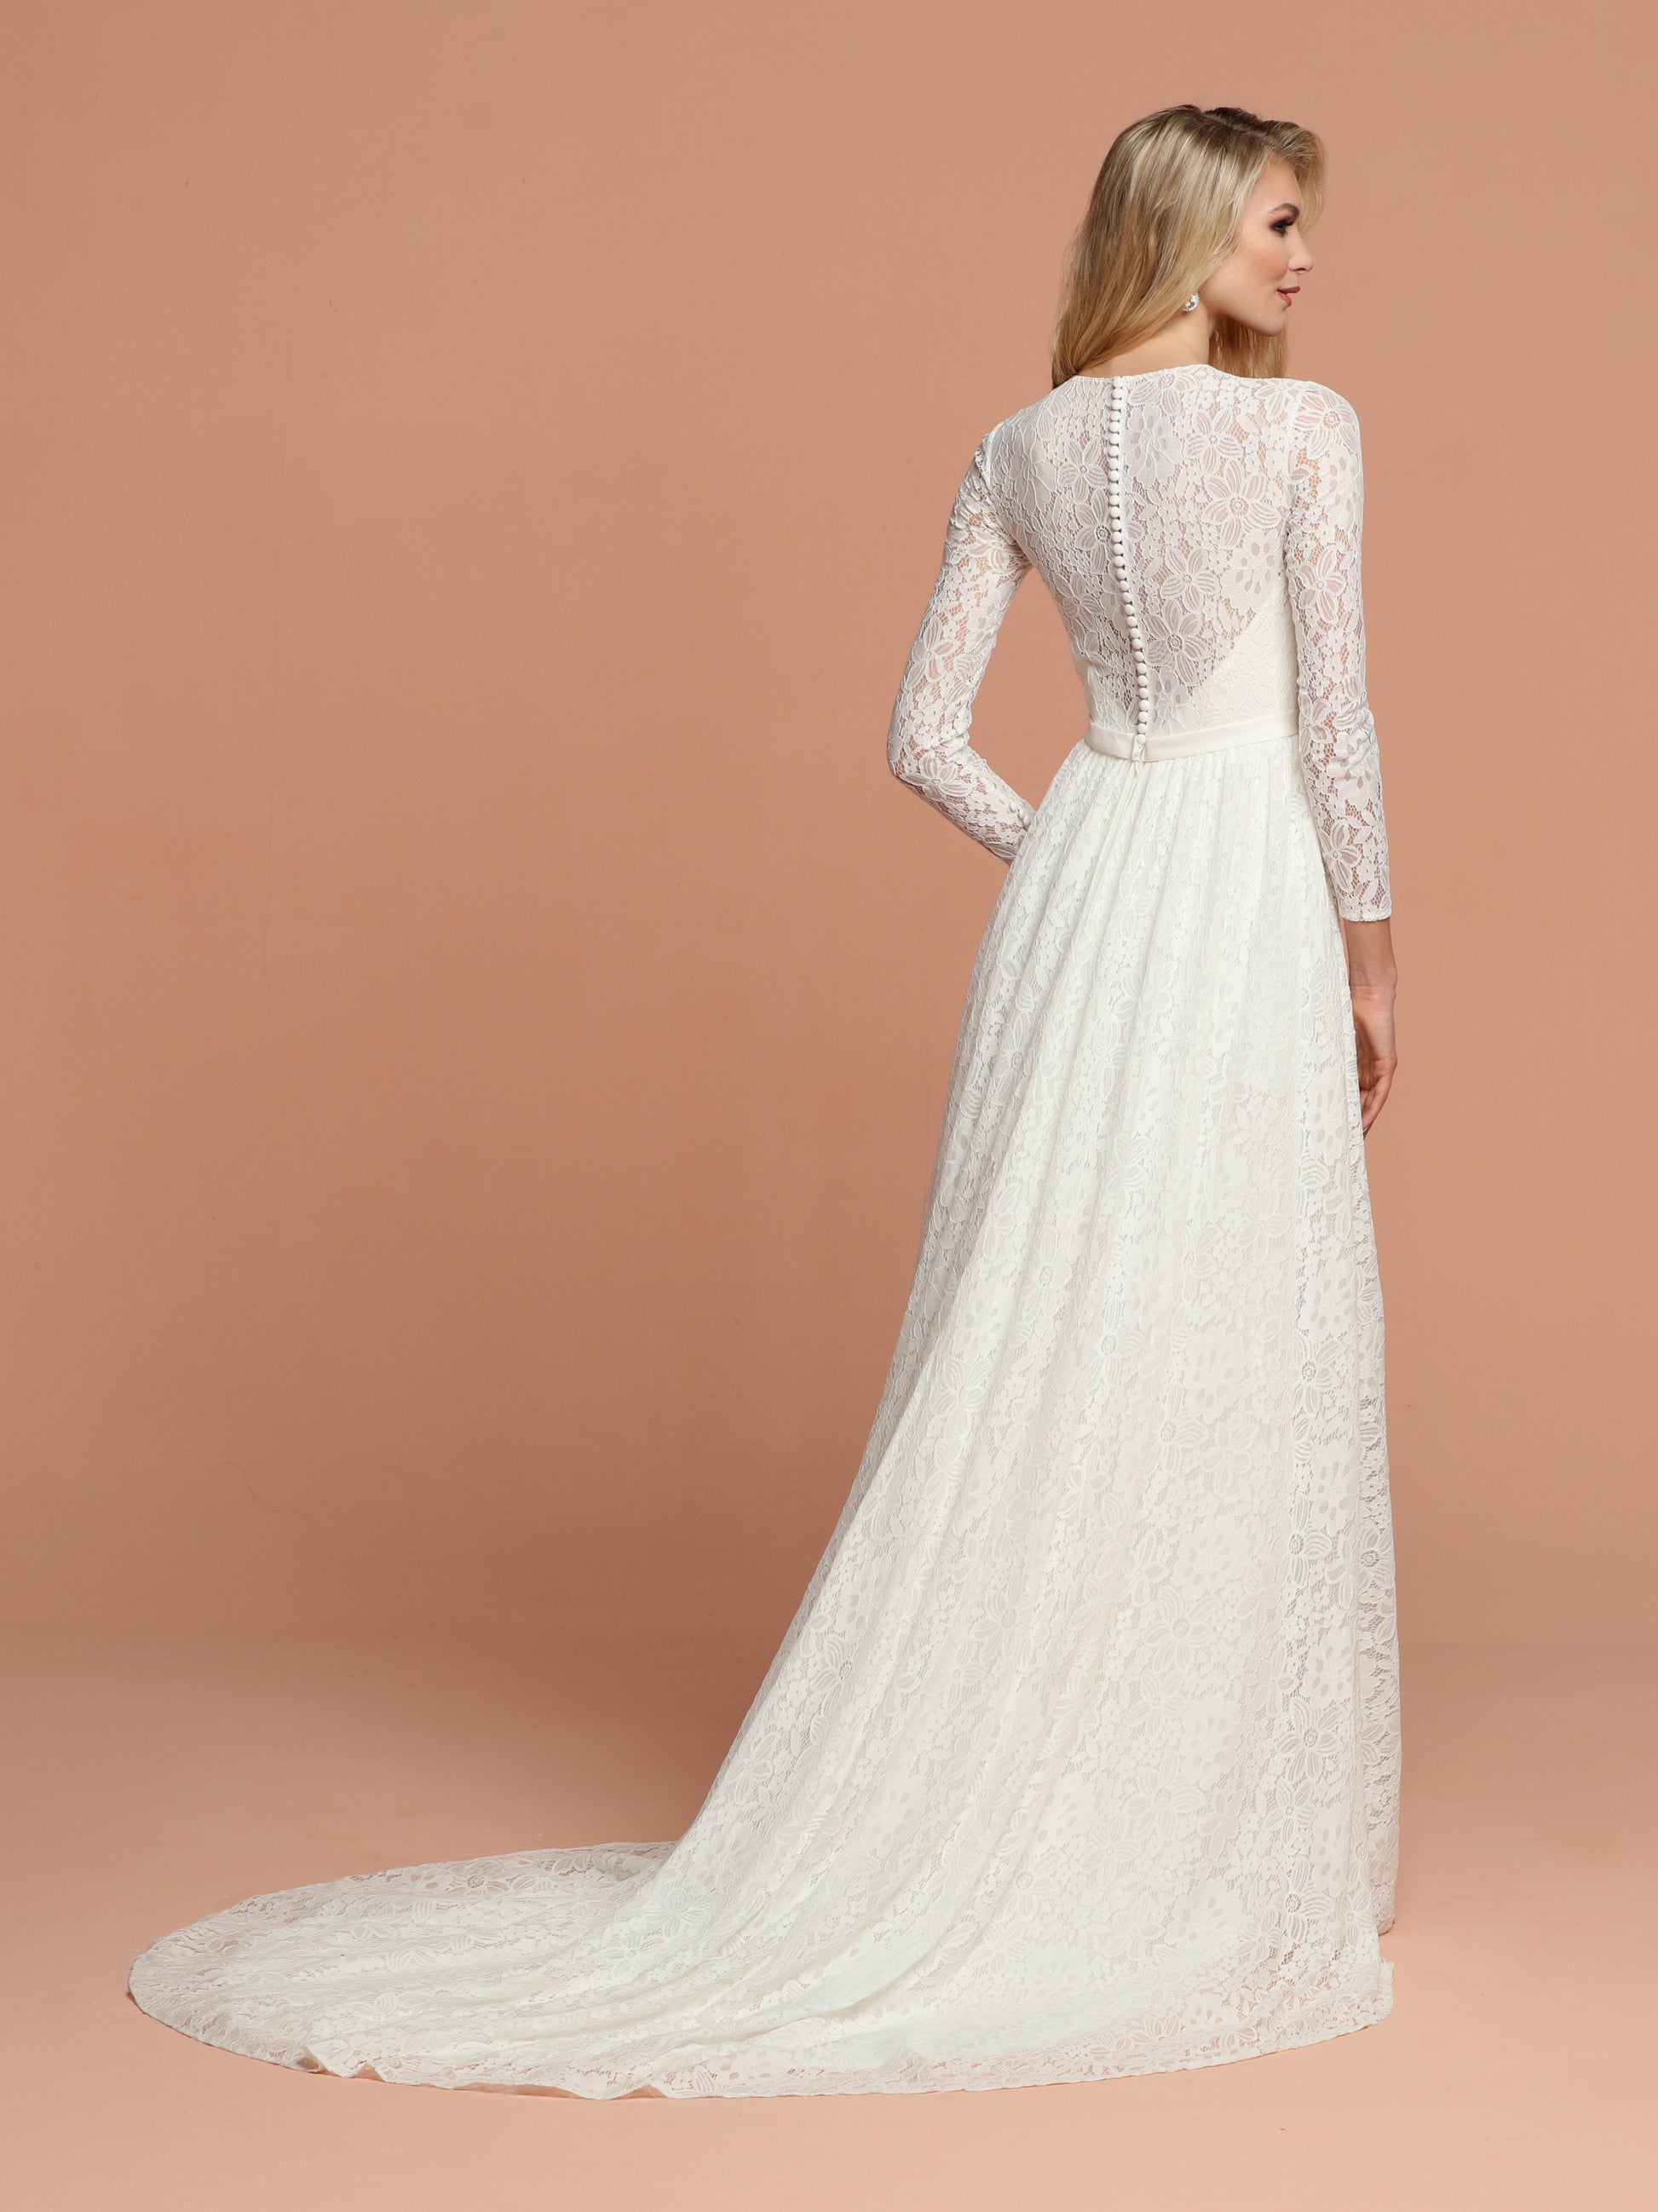 Davinci Bridal 50596 is a Long All over Lace Wedding Dress. Featuring 2/4 Length Sheer Lace sleeves. a sheer lace high neckline and back. Illusion sweetheart neckline. Lace Skirt Features a high slit and stunning train.   Available for 1-2 Week Delivery!!!  Available Sizes: 2,4,6,8,10,12,14,16,18,20  Available Colors: Ivory